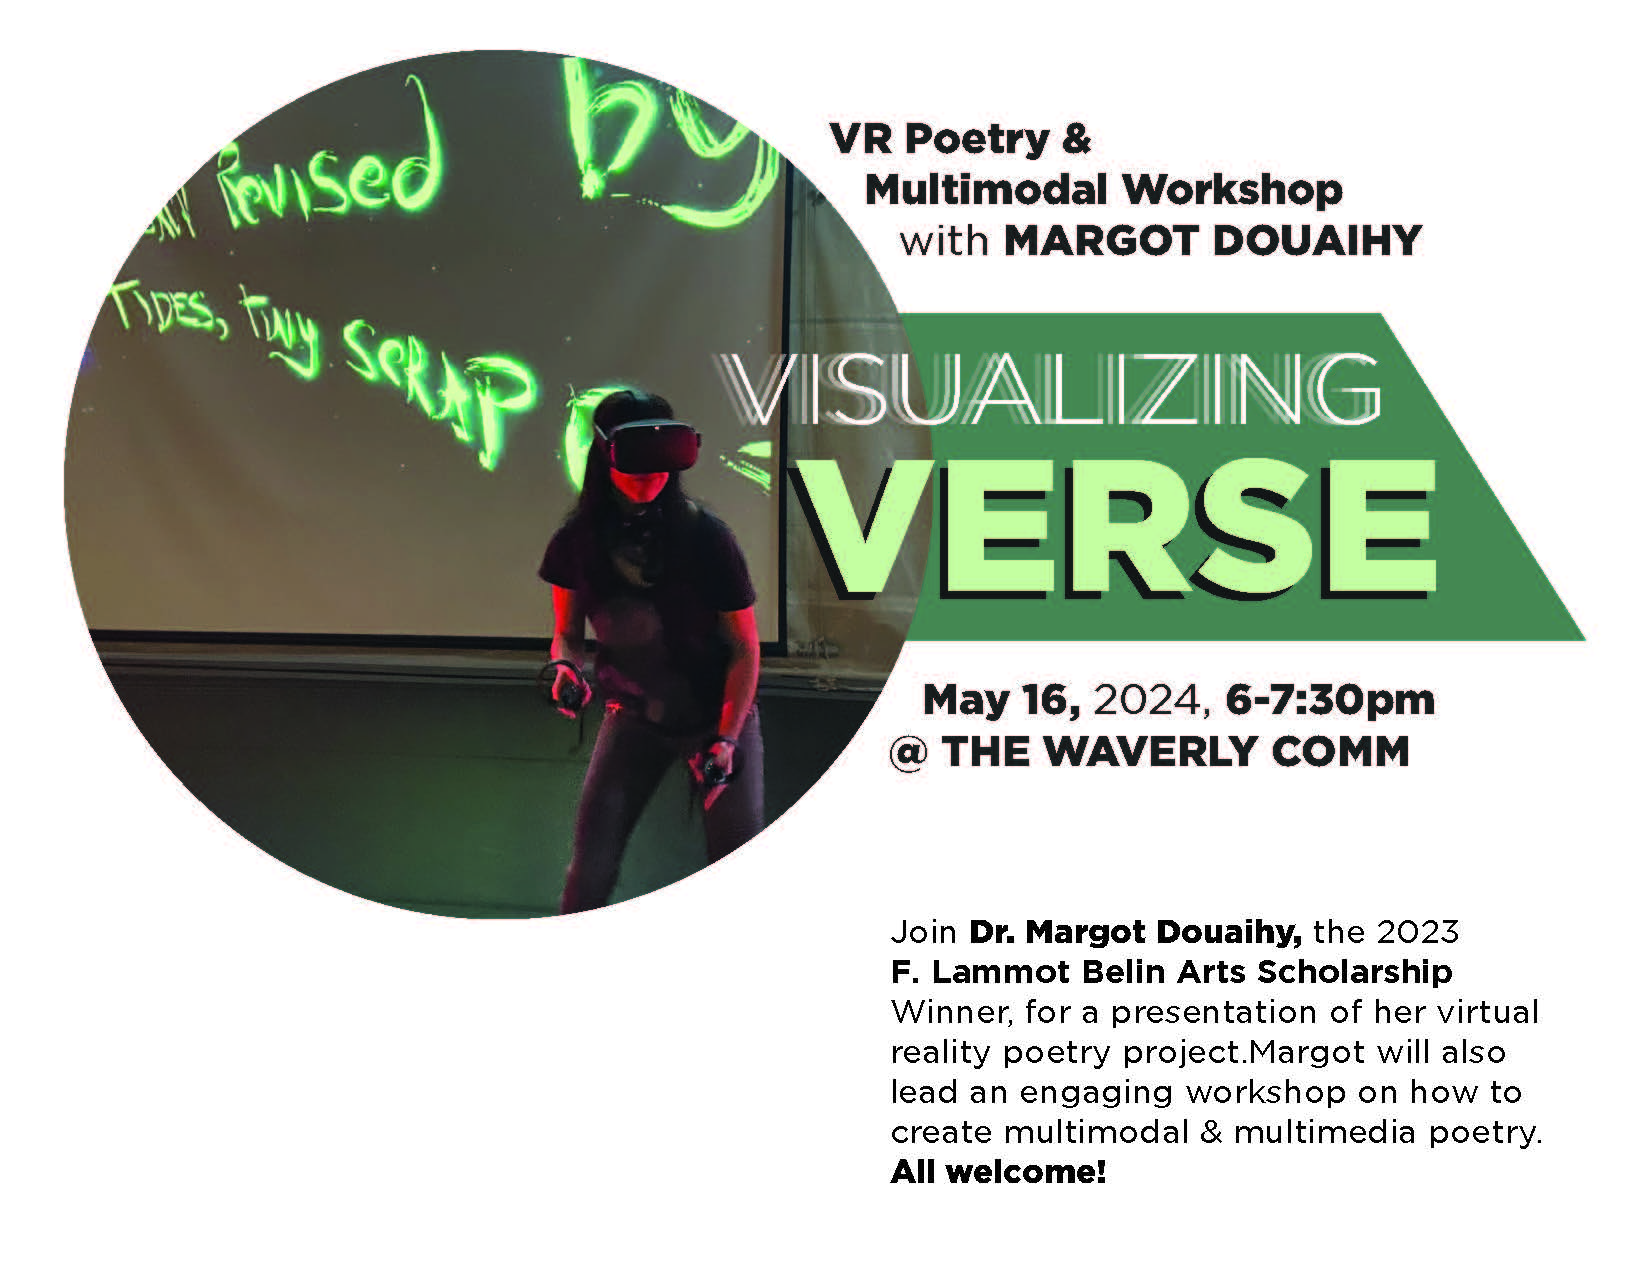 VISUALIZING VERSE - VR Poetry and Multimodal Workshop by Dr. Margot Douaihy